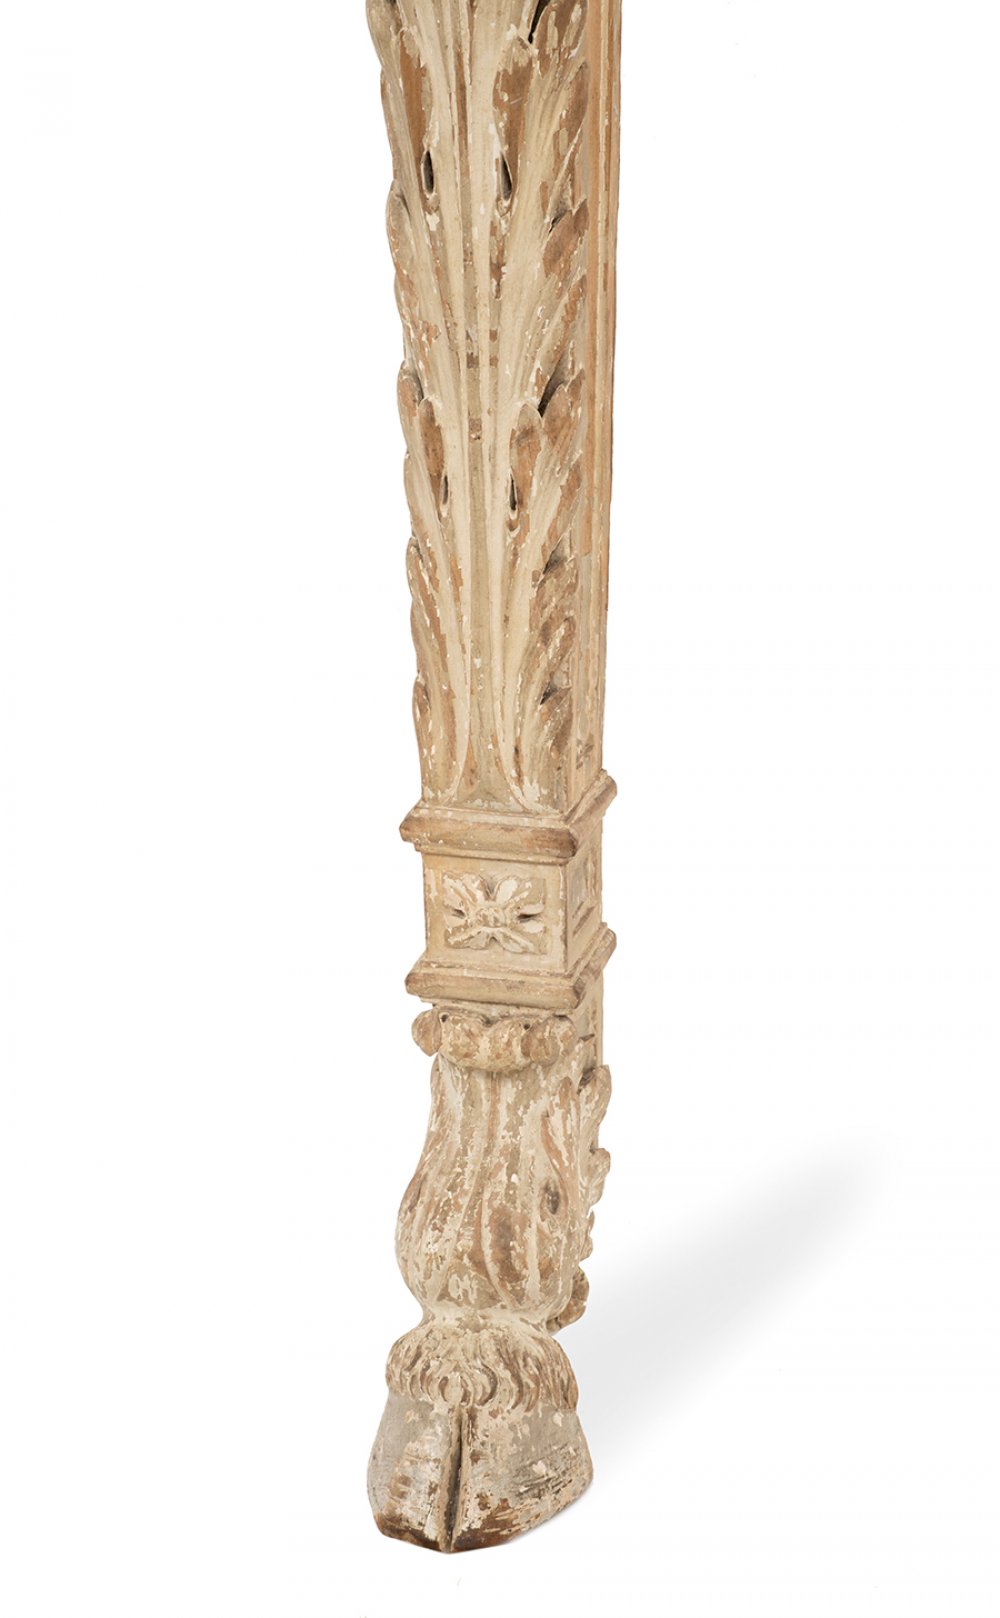 Louis XVI console; France, late 18th century.Carved and polychrome wood. White marble top.It - Image 3 of 6